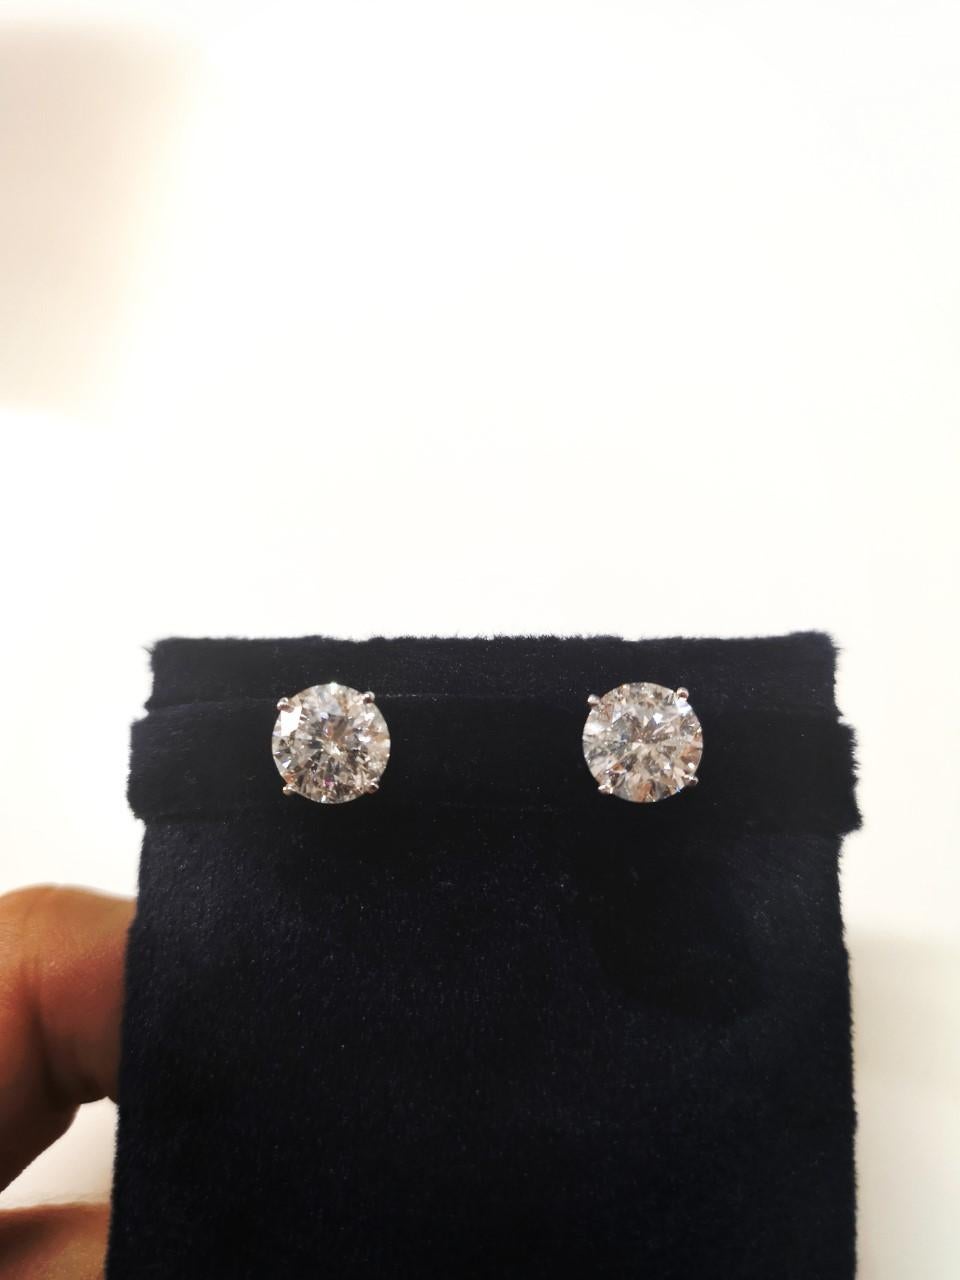 This gorgeous 3 carat pair of round brilliant cut natural diamonds offer fantastic size, bright white color, and a lively play of light! Measuring 8.1mm in diameter, the diamonds have a great spread and a larger than typical look for their weight!